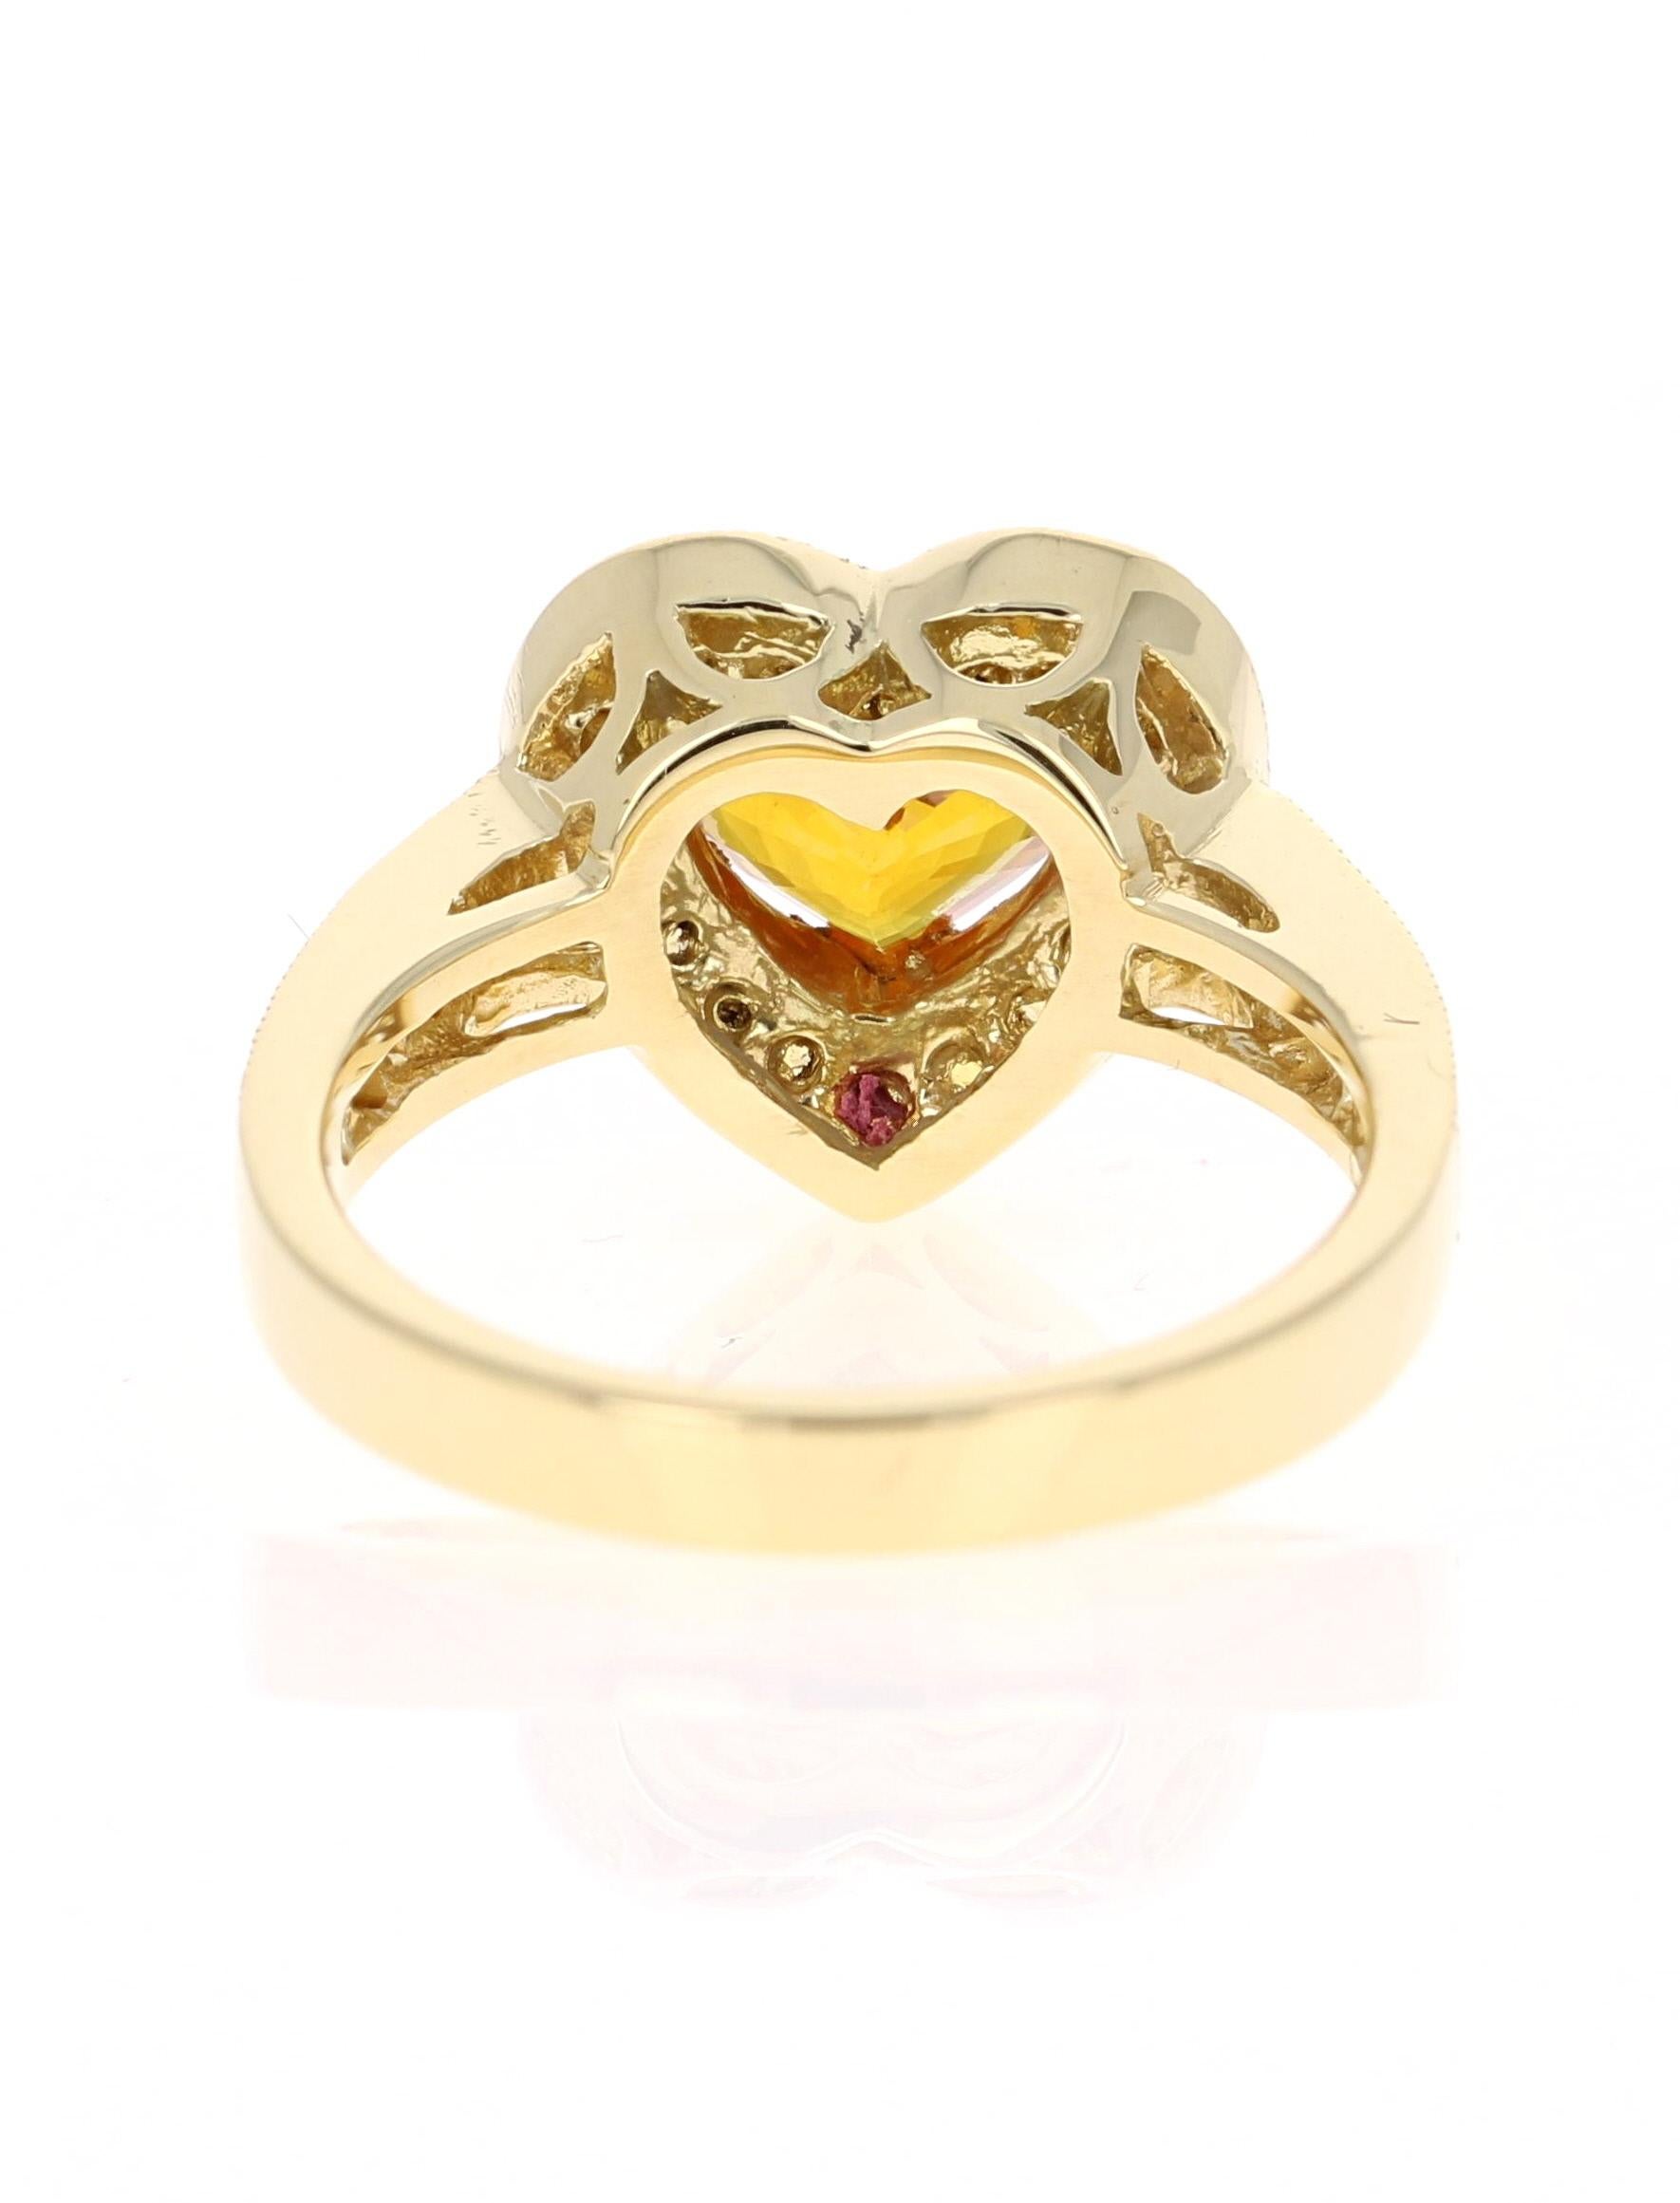 2.68 Carat Orange Sapphire Diamond Engagement Yellow Gold Ring In New Condition For Sale In Los Angeles, CA